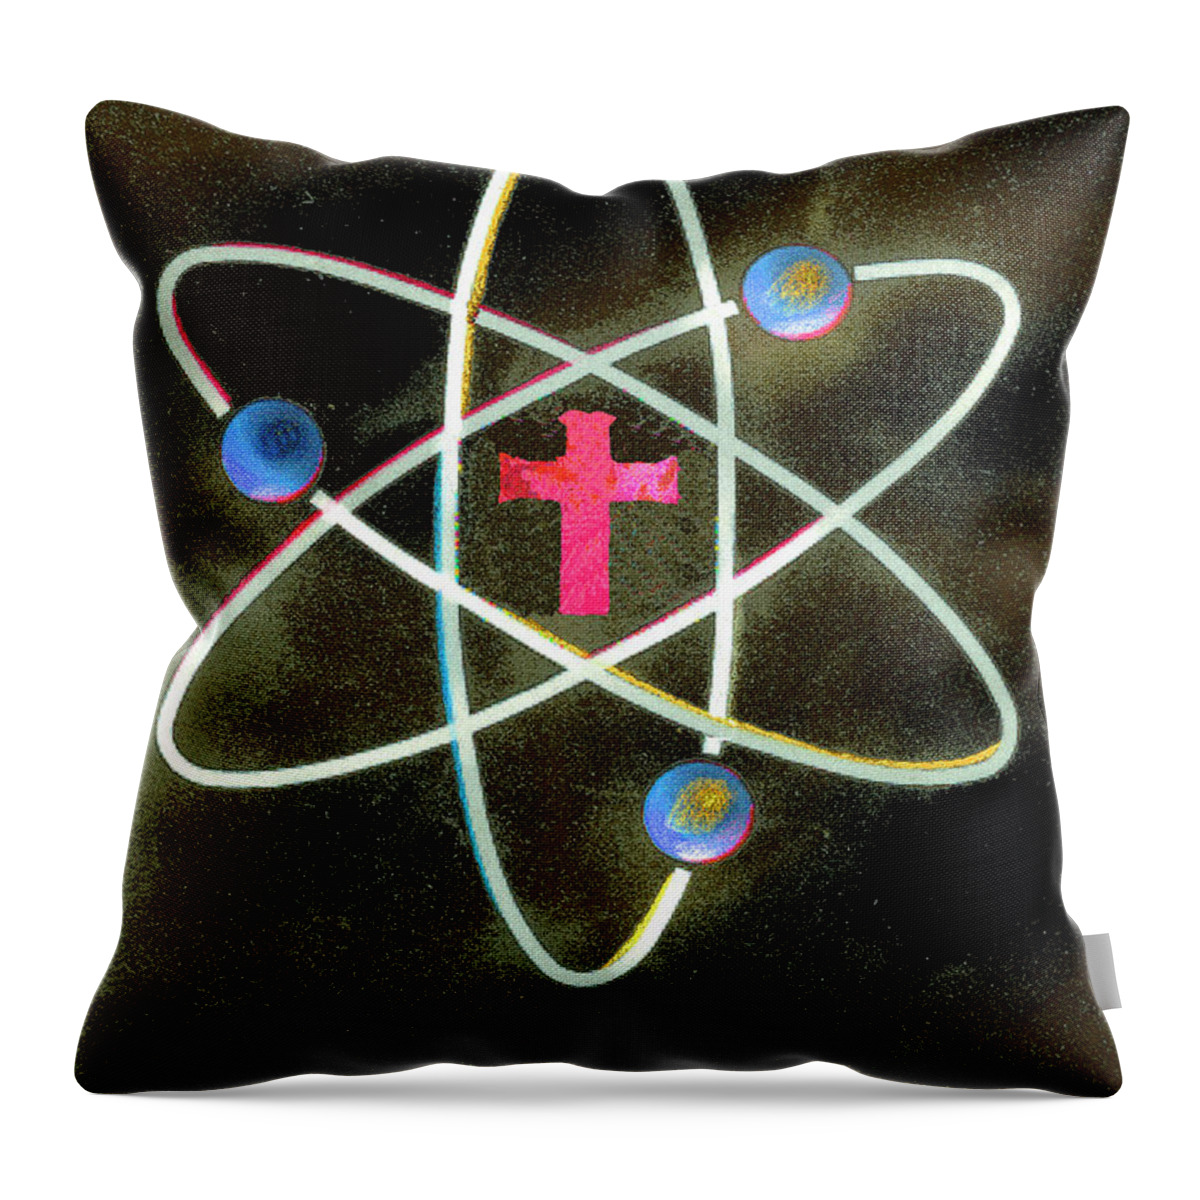 Atom Throw Pillow featuring the photograph Cross At The Center Of Atom Symbol by Ikon Ikon Images